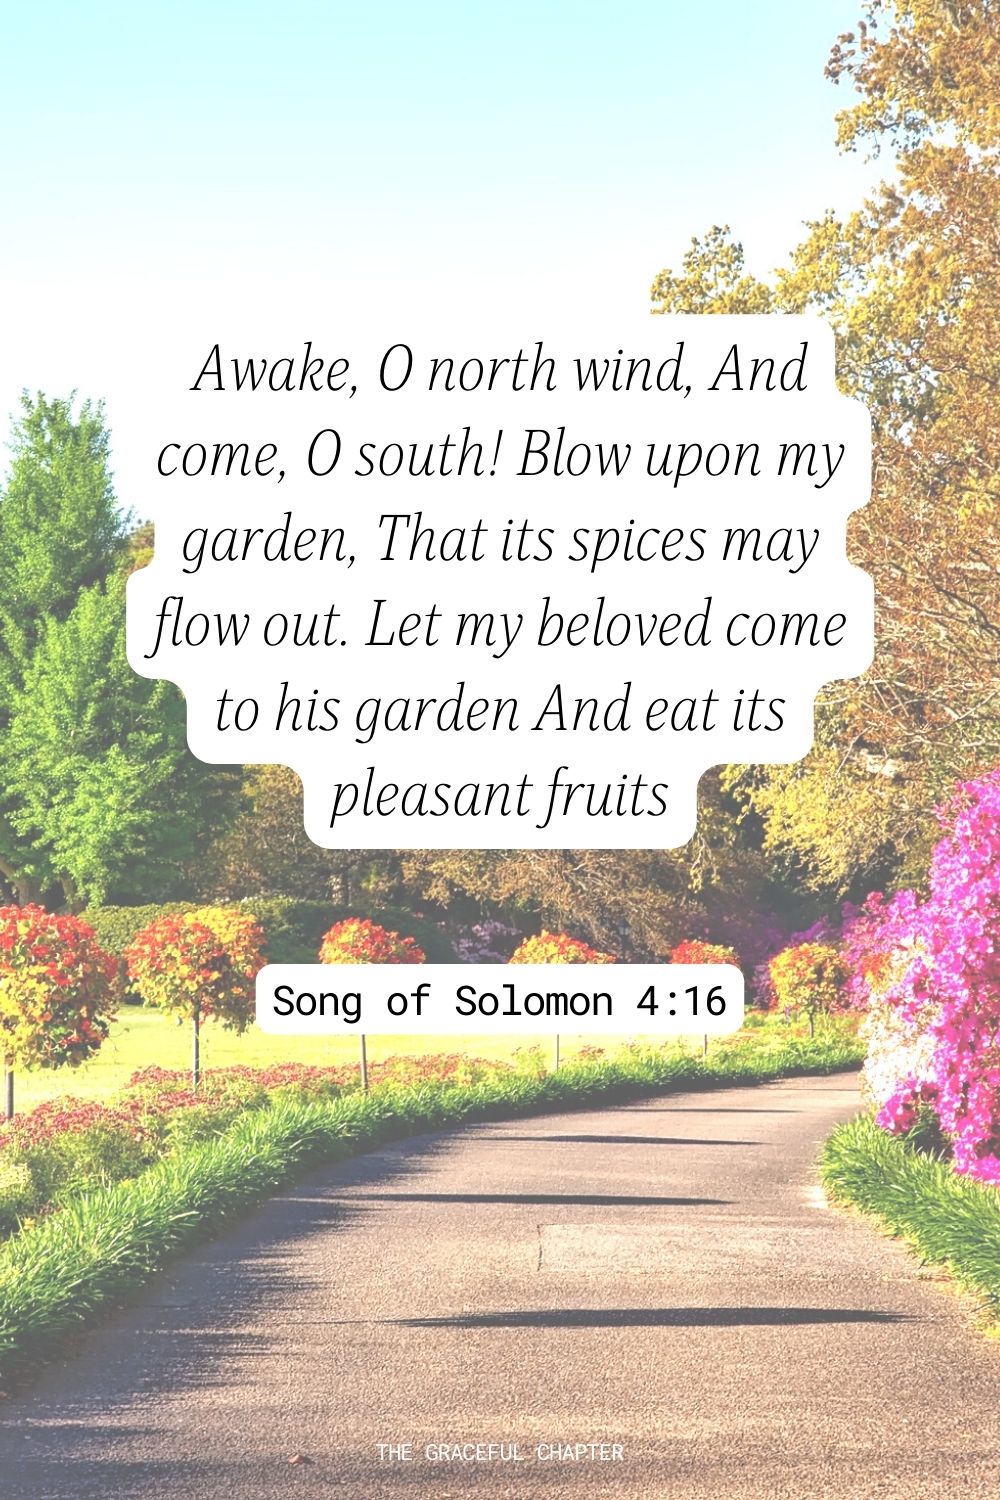 Awake, O north wind, And come, O south! Blow upon my garden, That its spices may flow out. Let my beloved come to his garden And eat its pleasant fruits Song of Solomon 4:16